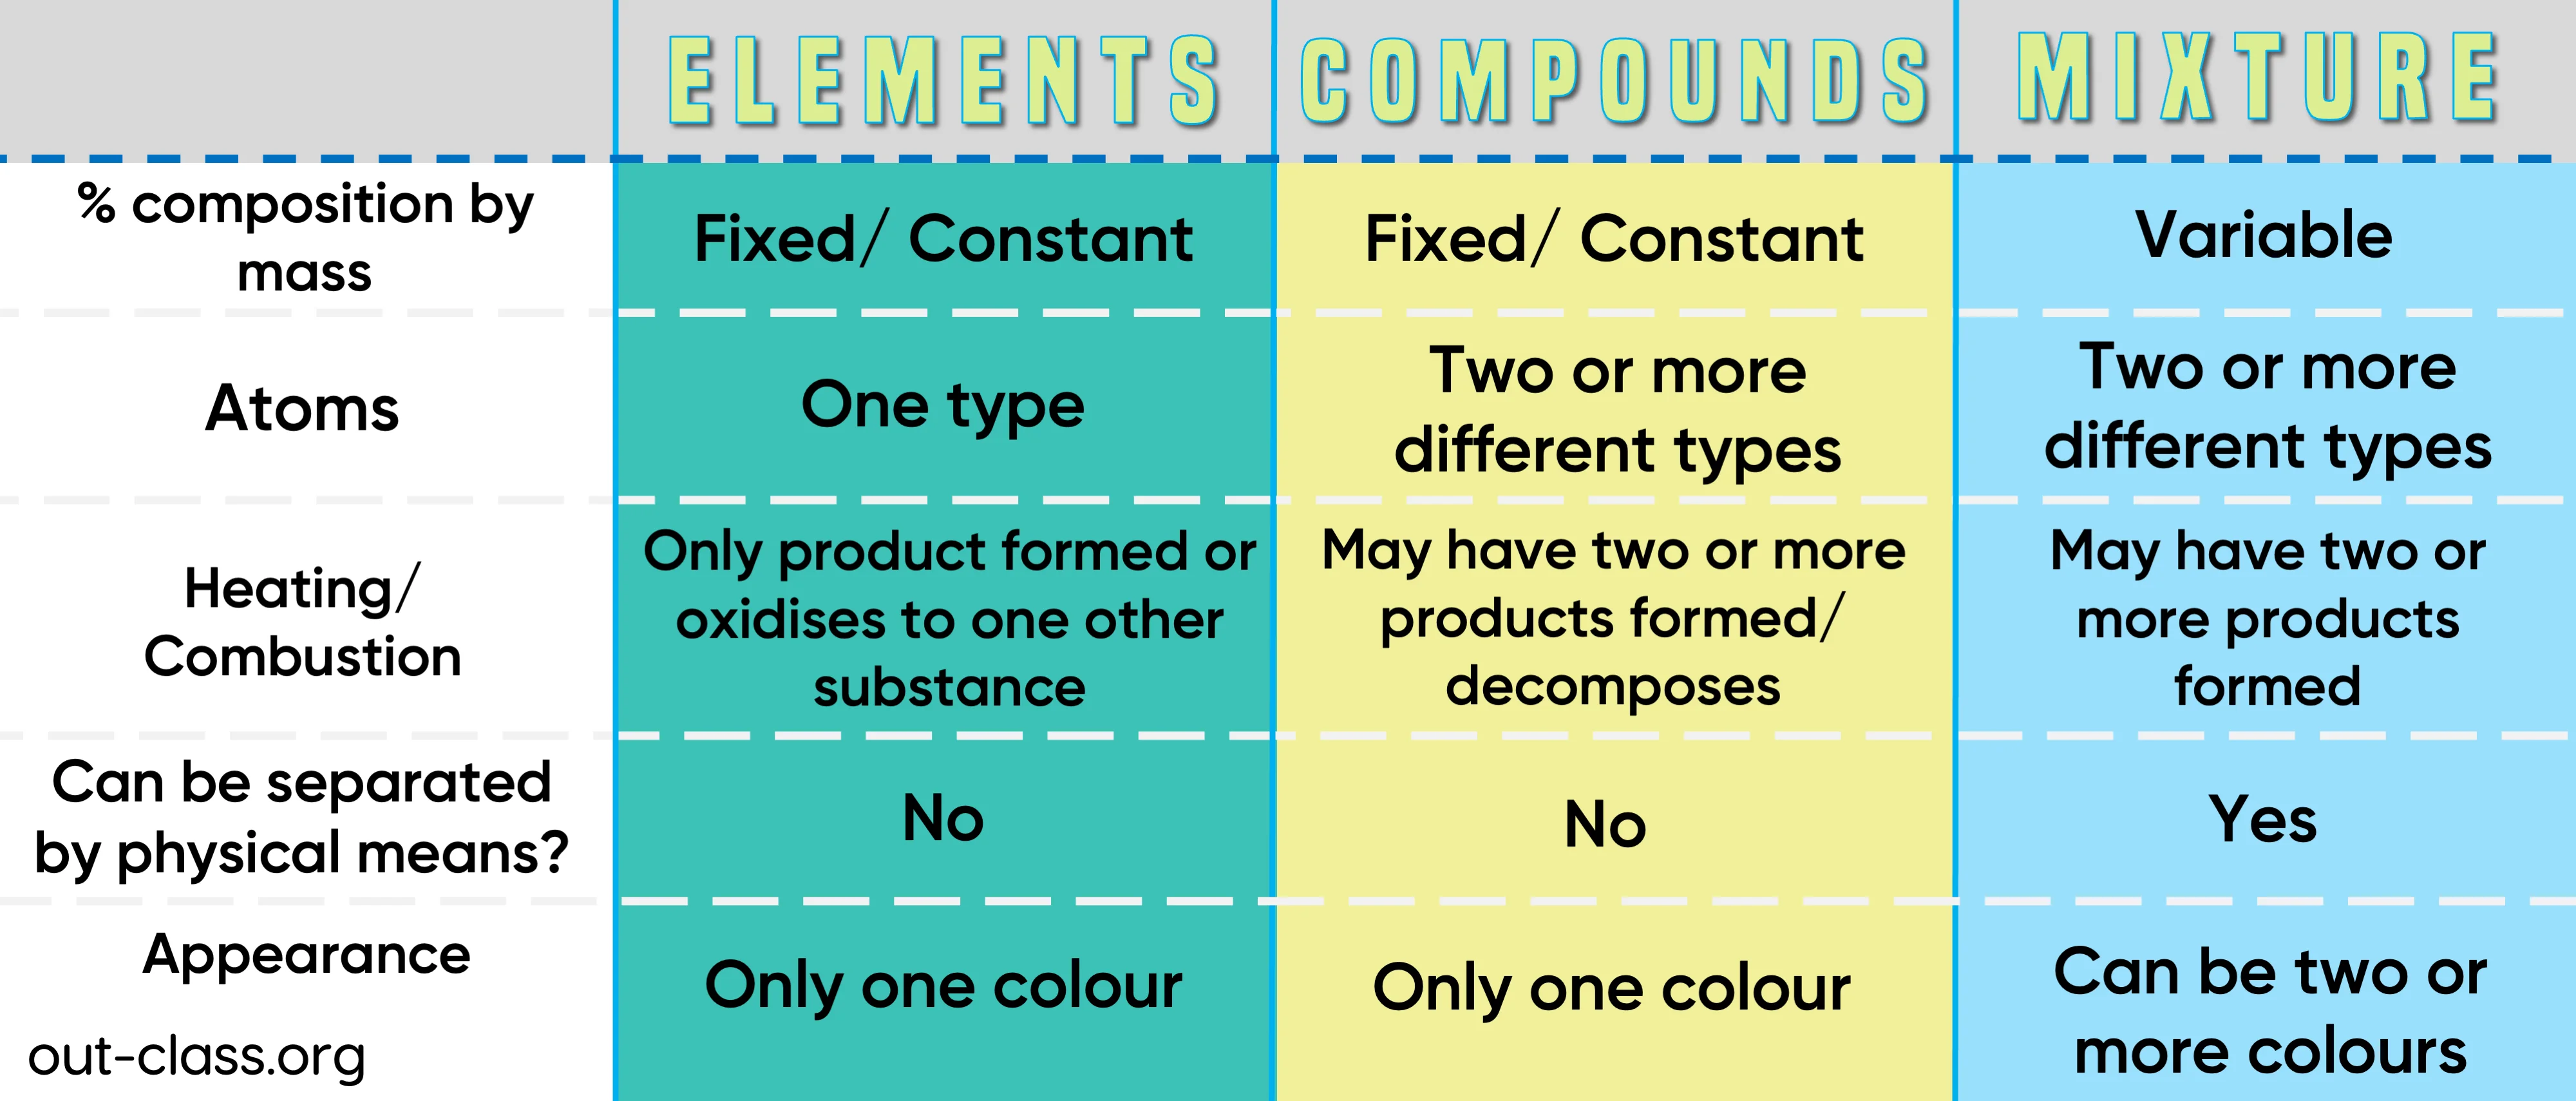 it demonstrates what the difference between elements, compounds and mixtures are.